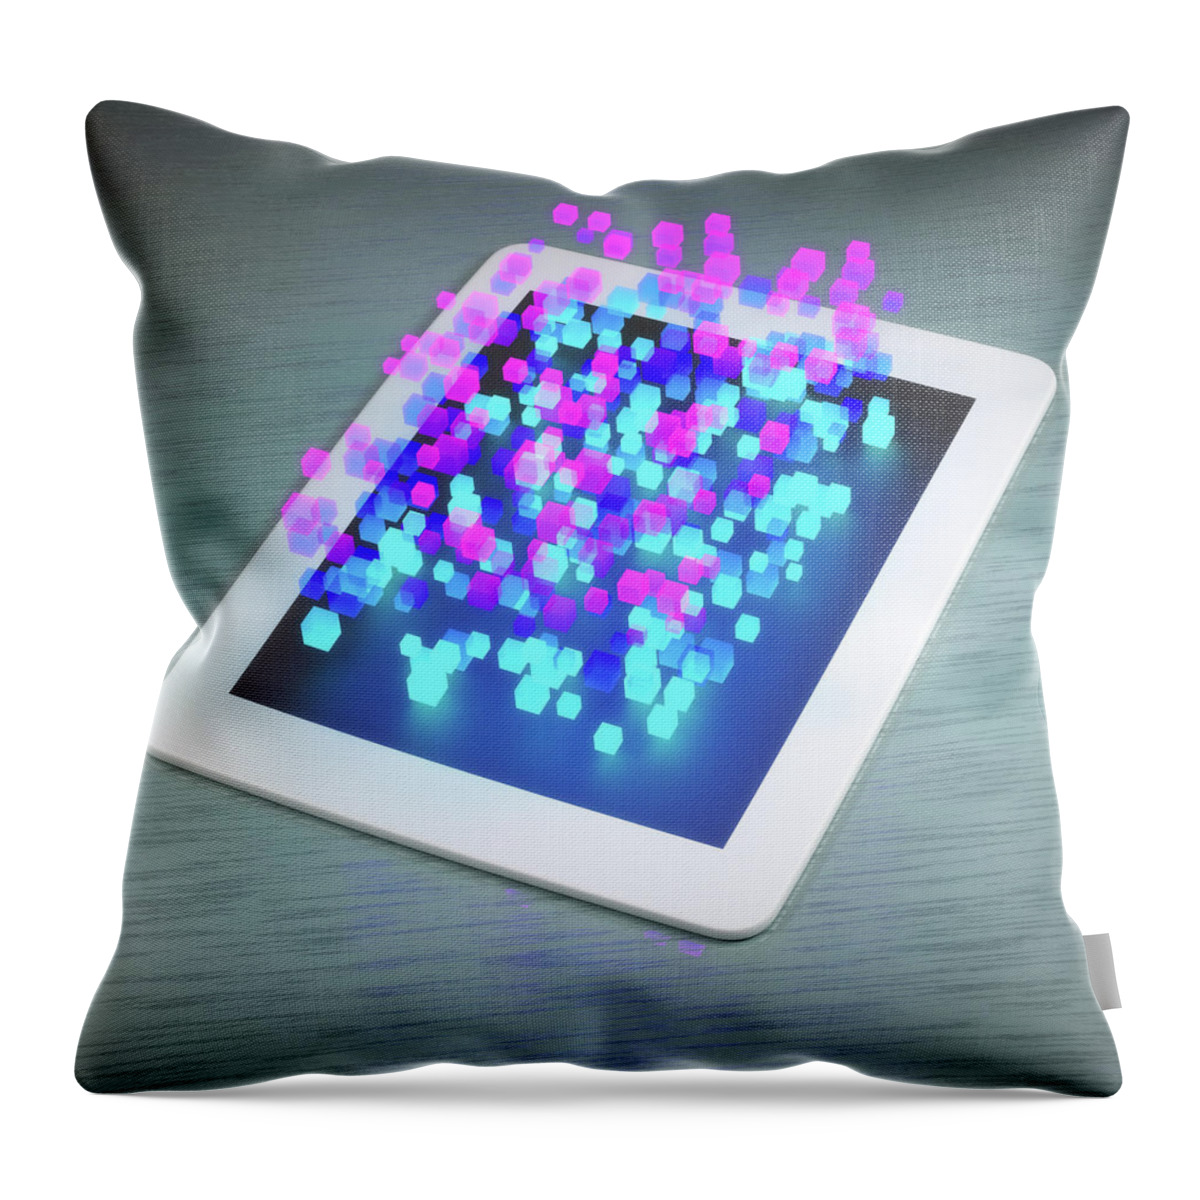 Block Shape Throw Pillow featuring the digital art Tablet With Three Dimensional Cubes by Maciej Frolow